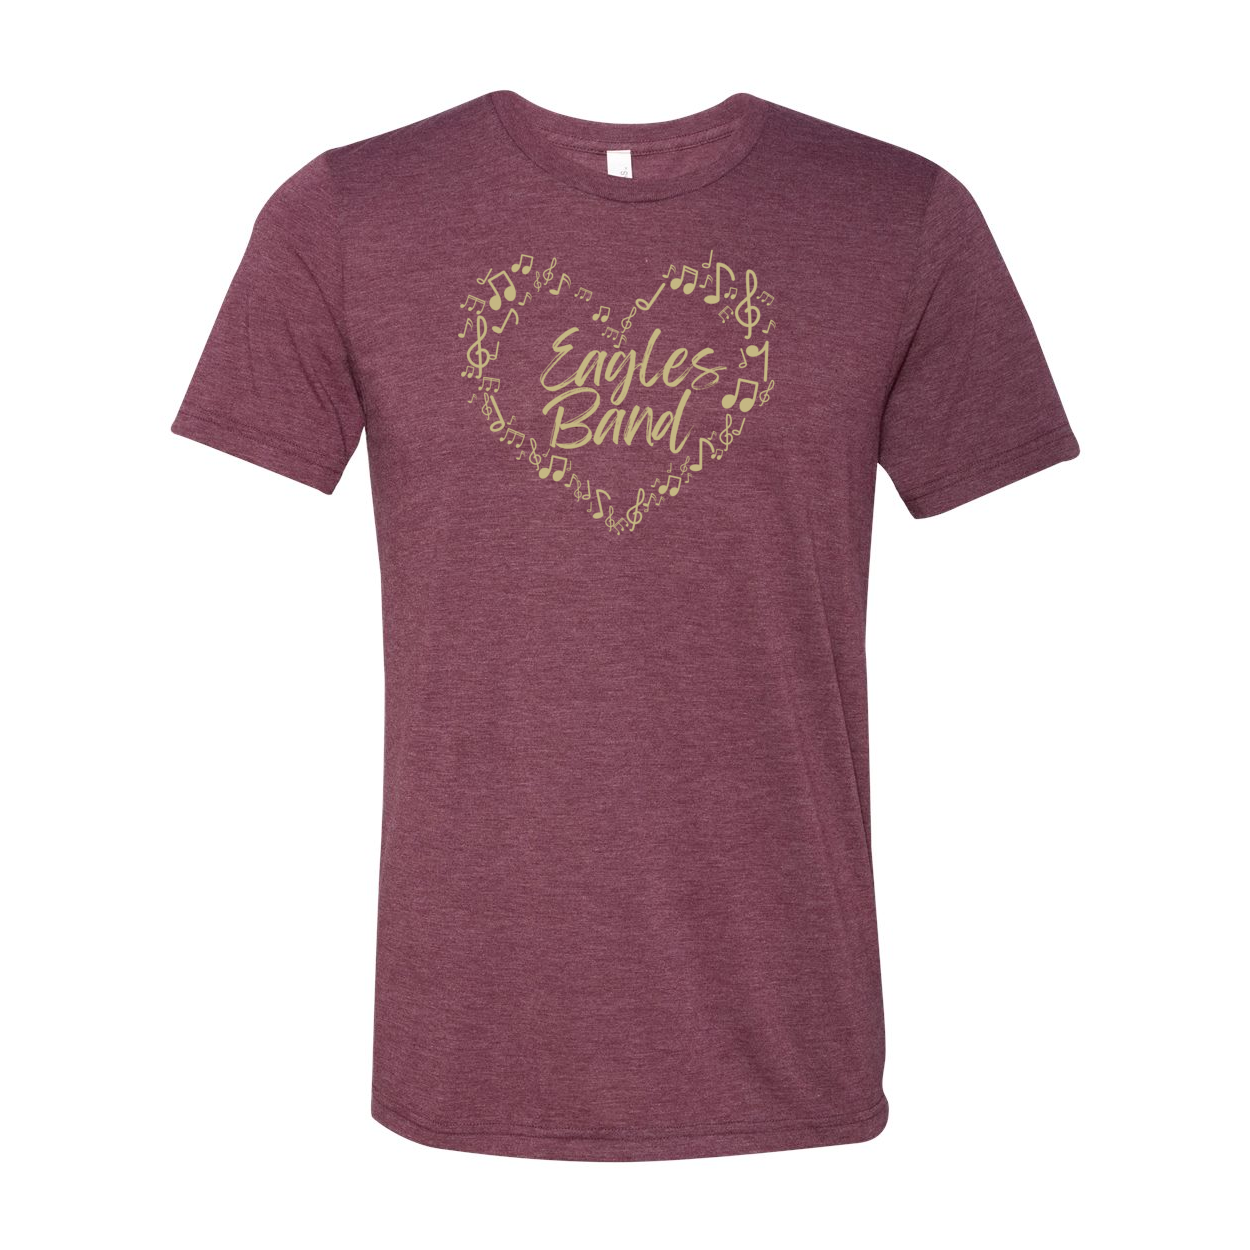 Adult Unisex Super Soft Musical Heart Short Sleeve Graphic Tee - New Albany Eagles